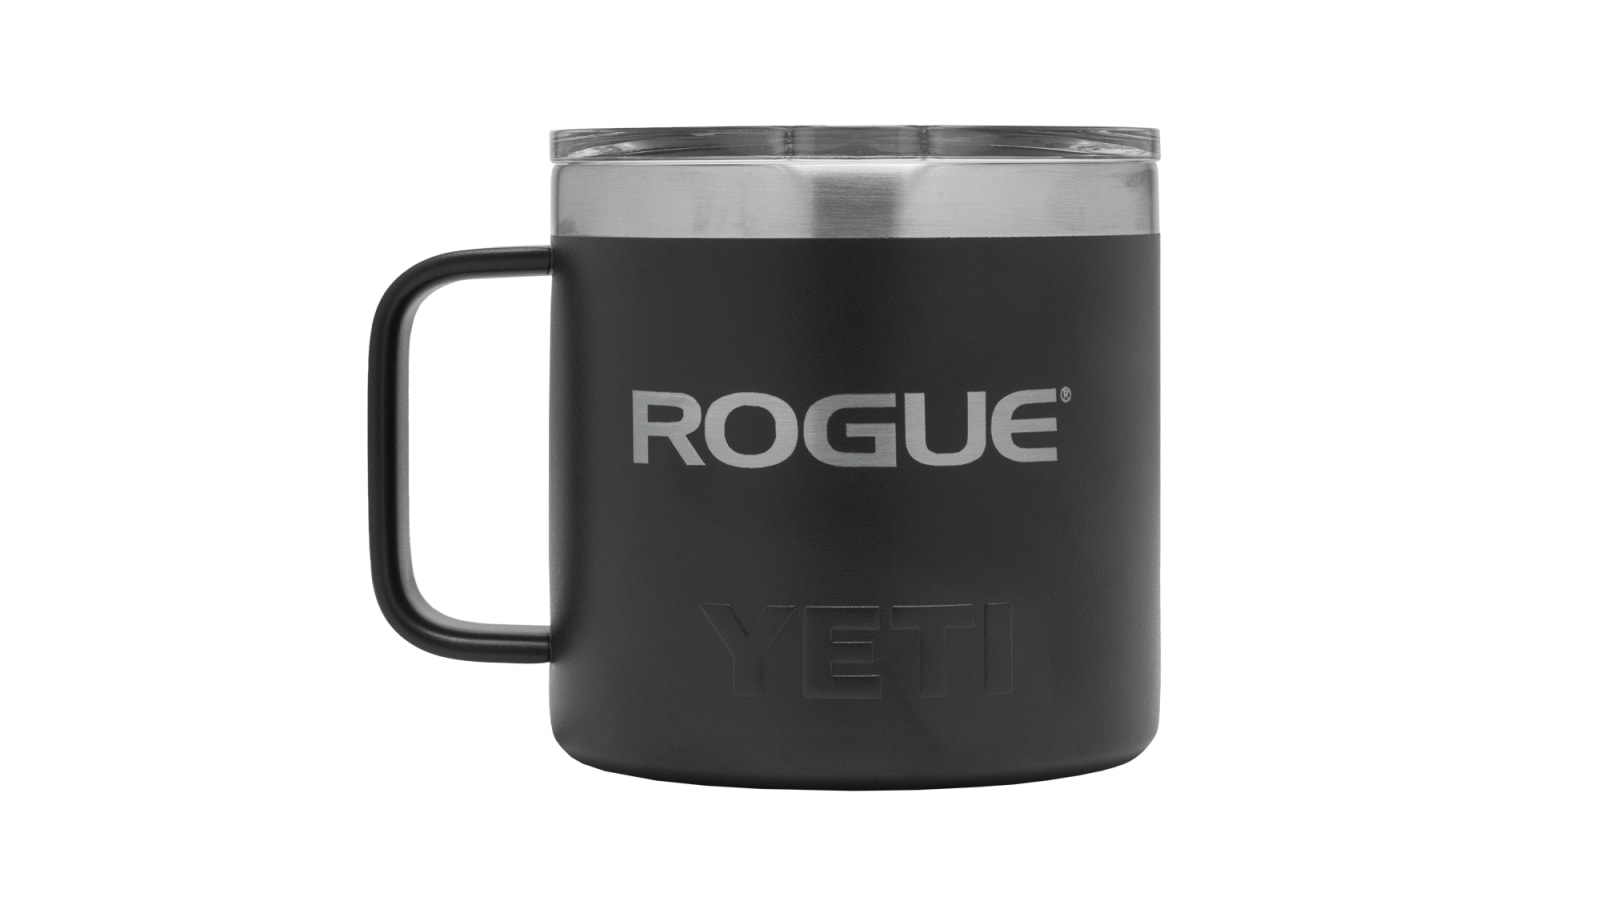 https://assets.roguefitness.com/f_auto,q_auto,c_limit,w_1600,b_rgb:ffffff/catalog/Gear%20and%20Accessories/Accessories/Shakers%20and%20Bottles/YT0063/YT0063-H_onavhx.png